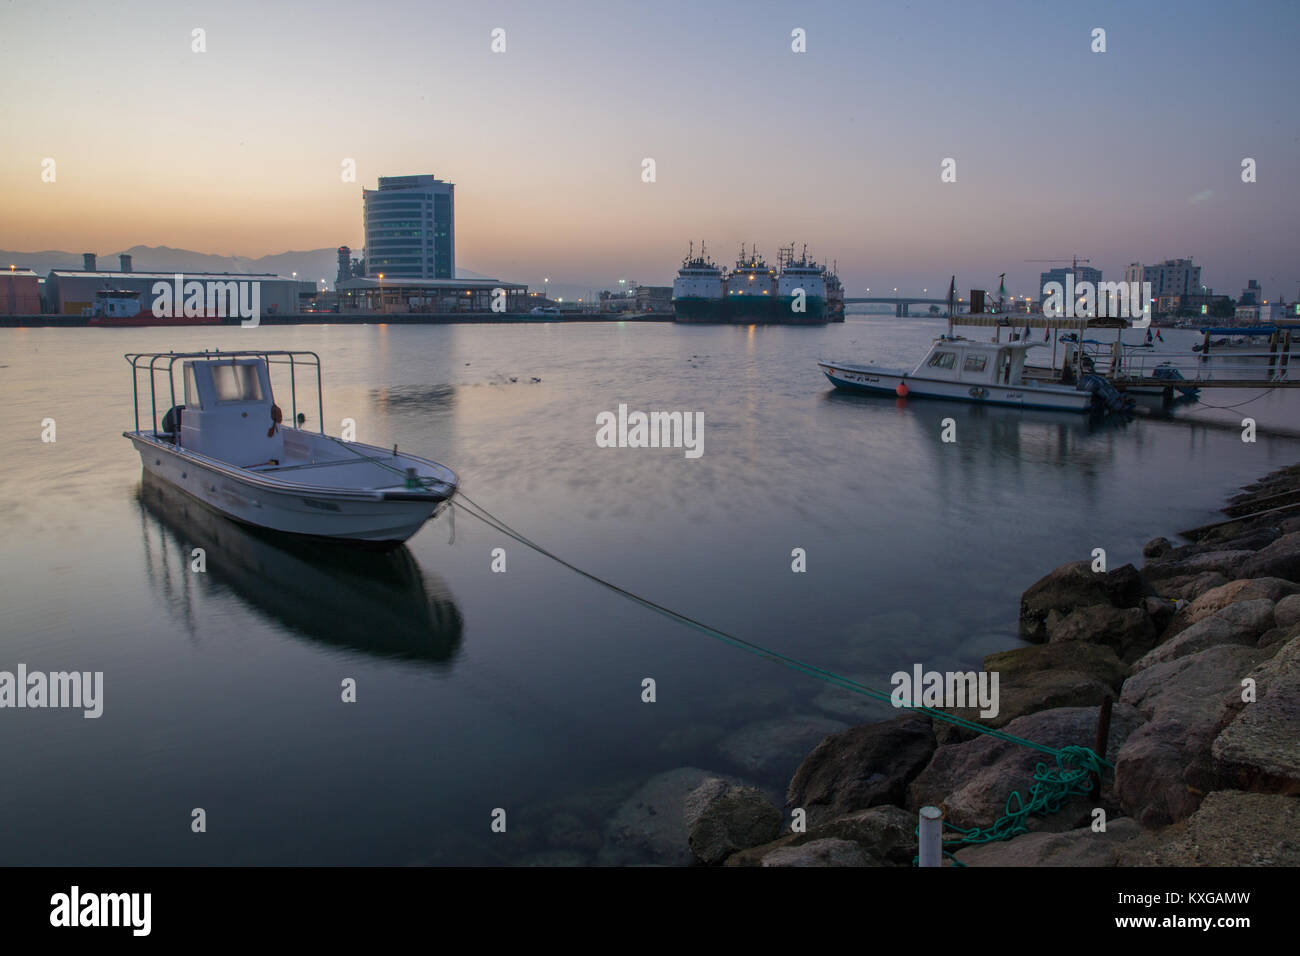 Ras Al Khaimah, Ras Al Khaimah, United Arab Emirates. 9th Jan, 2018. A fishing boat is anchored at the harbor before going out to fish.Every morning the fishermen go out into the sea to bring fresh fish to the fish market in Ras Al Khaimah which is the main wholesale center supplying seafood to the country. Credit: Mike Hook/SOPA/ZUMA Wire/Alamy Live News Stock Photo